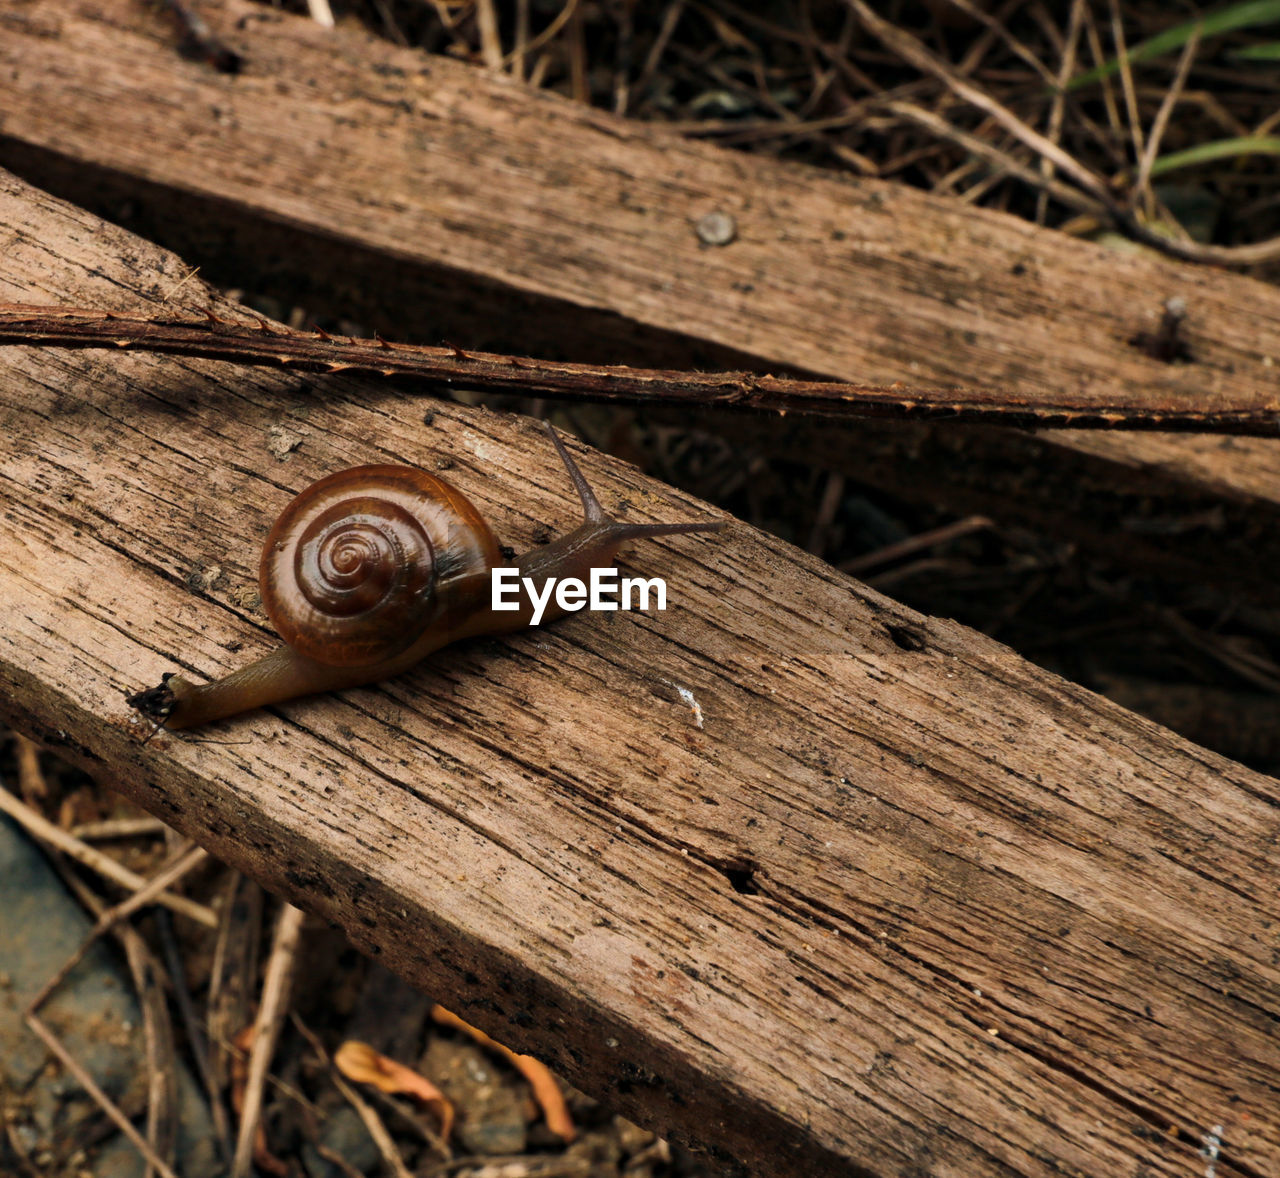 HIGH ANGLE VIEW OF SNAIL ON WOODEN WOOD